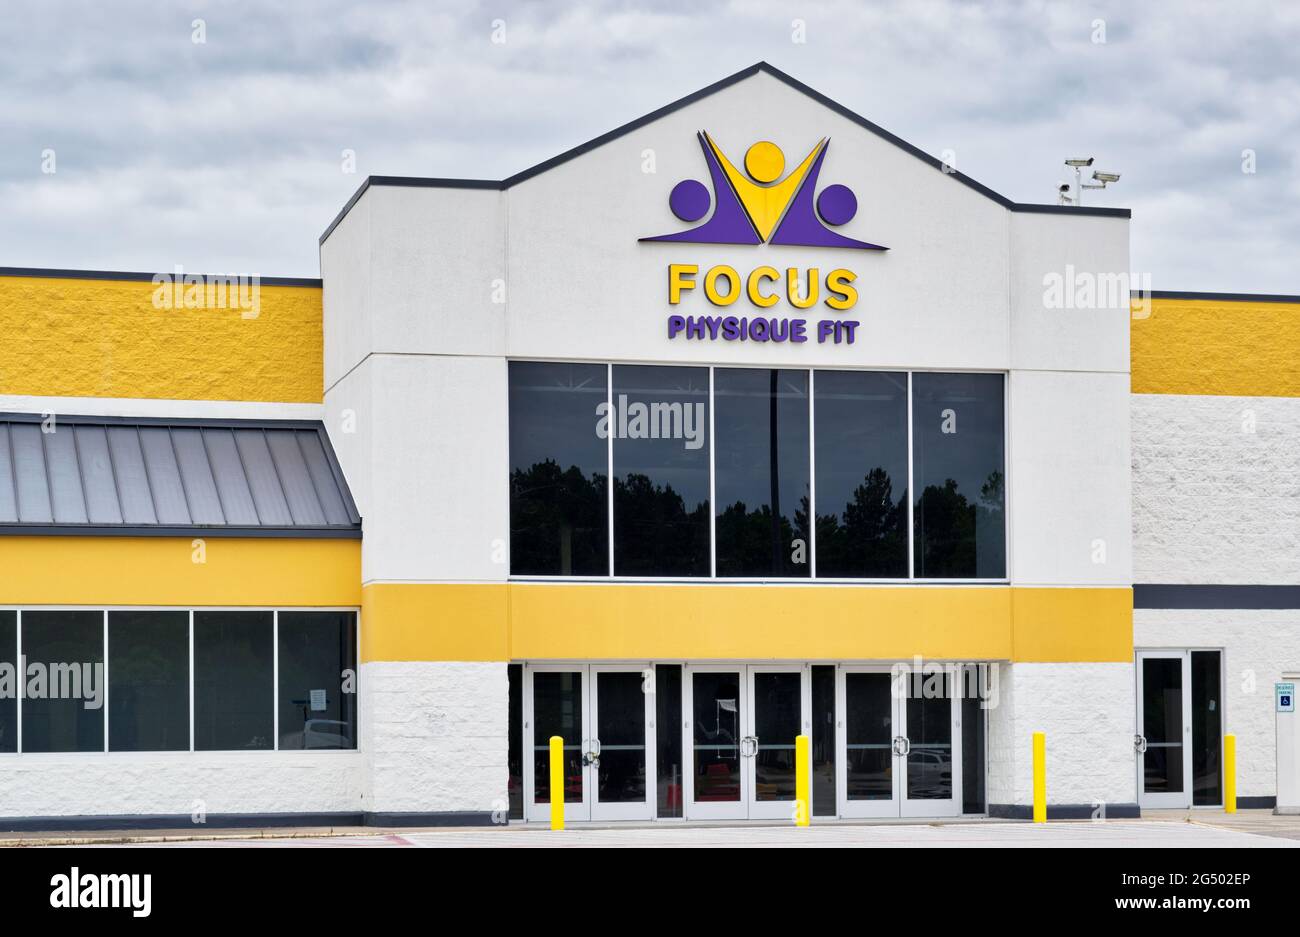 Houston, Texas USA 05-14-2021: Focus Physique Fit gym exterior located in Willowbrook Mall, Houston TX. Stock Photo